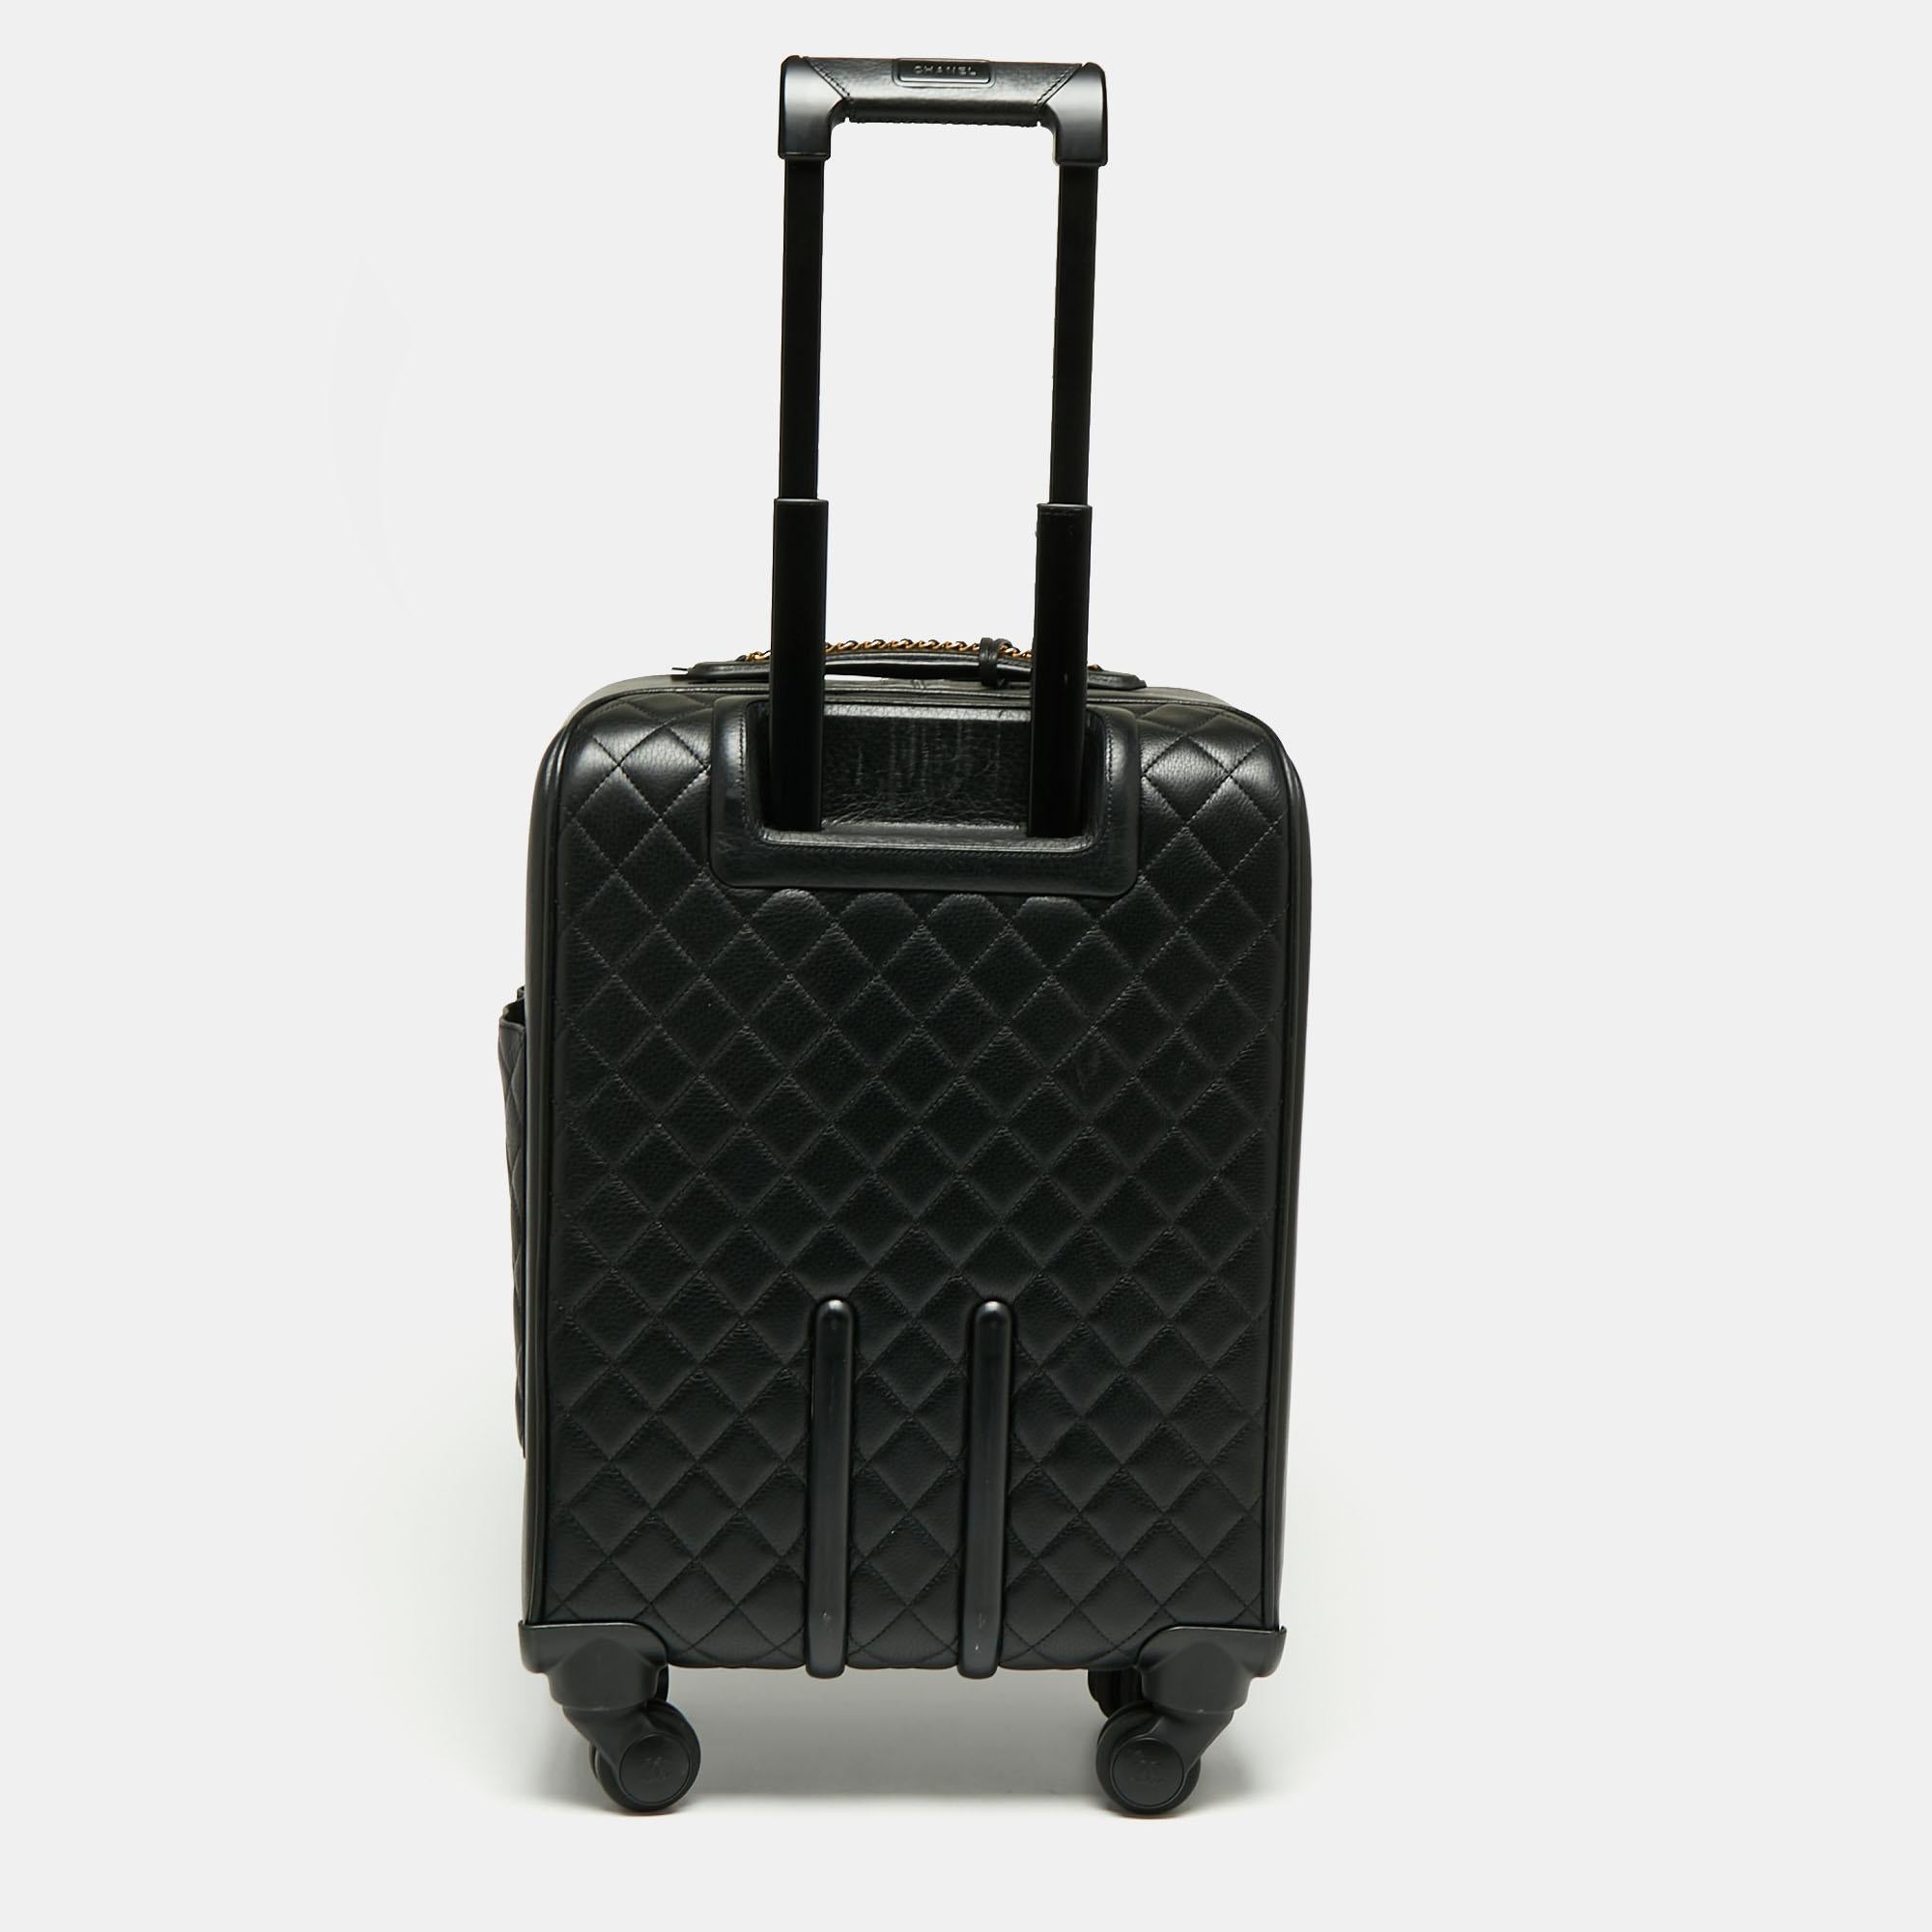 Travel to the places your heart desires with this Chanel Coco Case trolley. It is made of diamond-quilted leather into a spacious size. Lightweight, robust, and ultra-mobile, it glides along smoothly on its four wheels, while its ingeniously